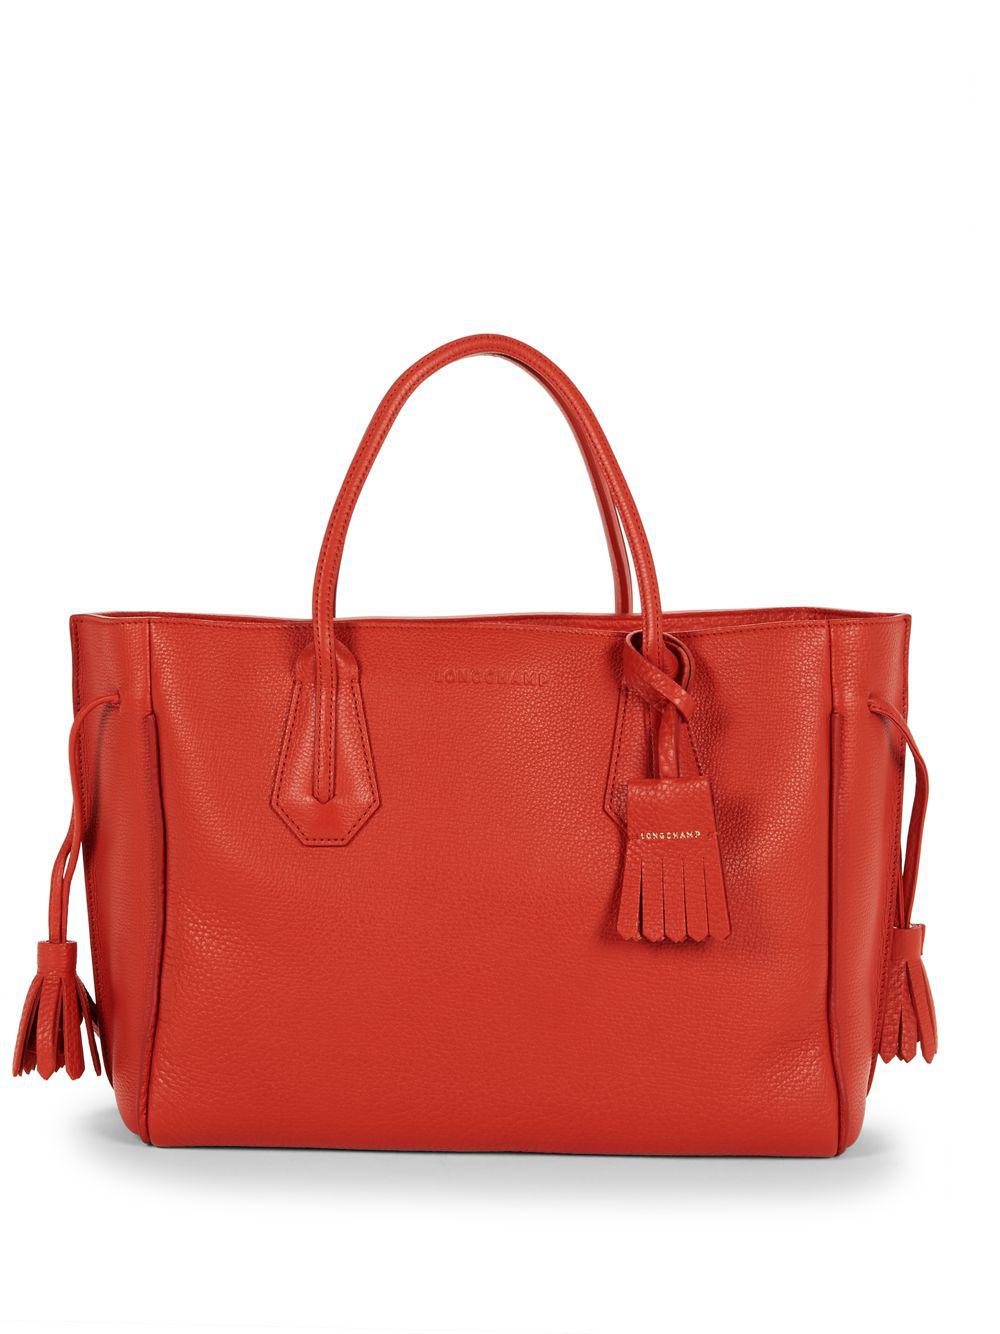 Longchamp Penelope Leather Top Handle Bag in Red | Lyst